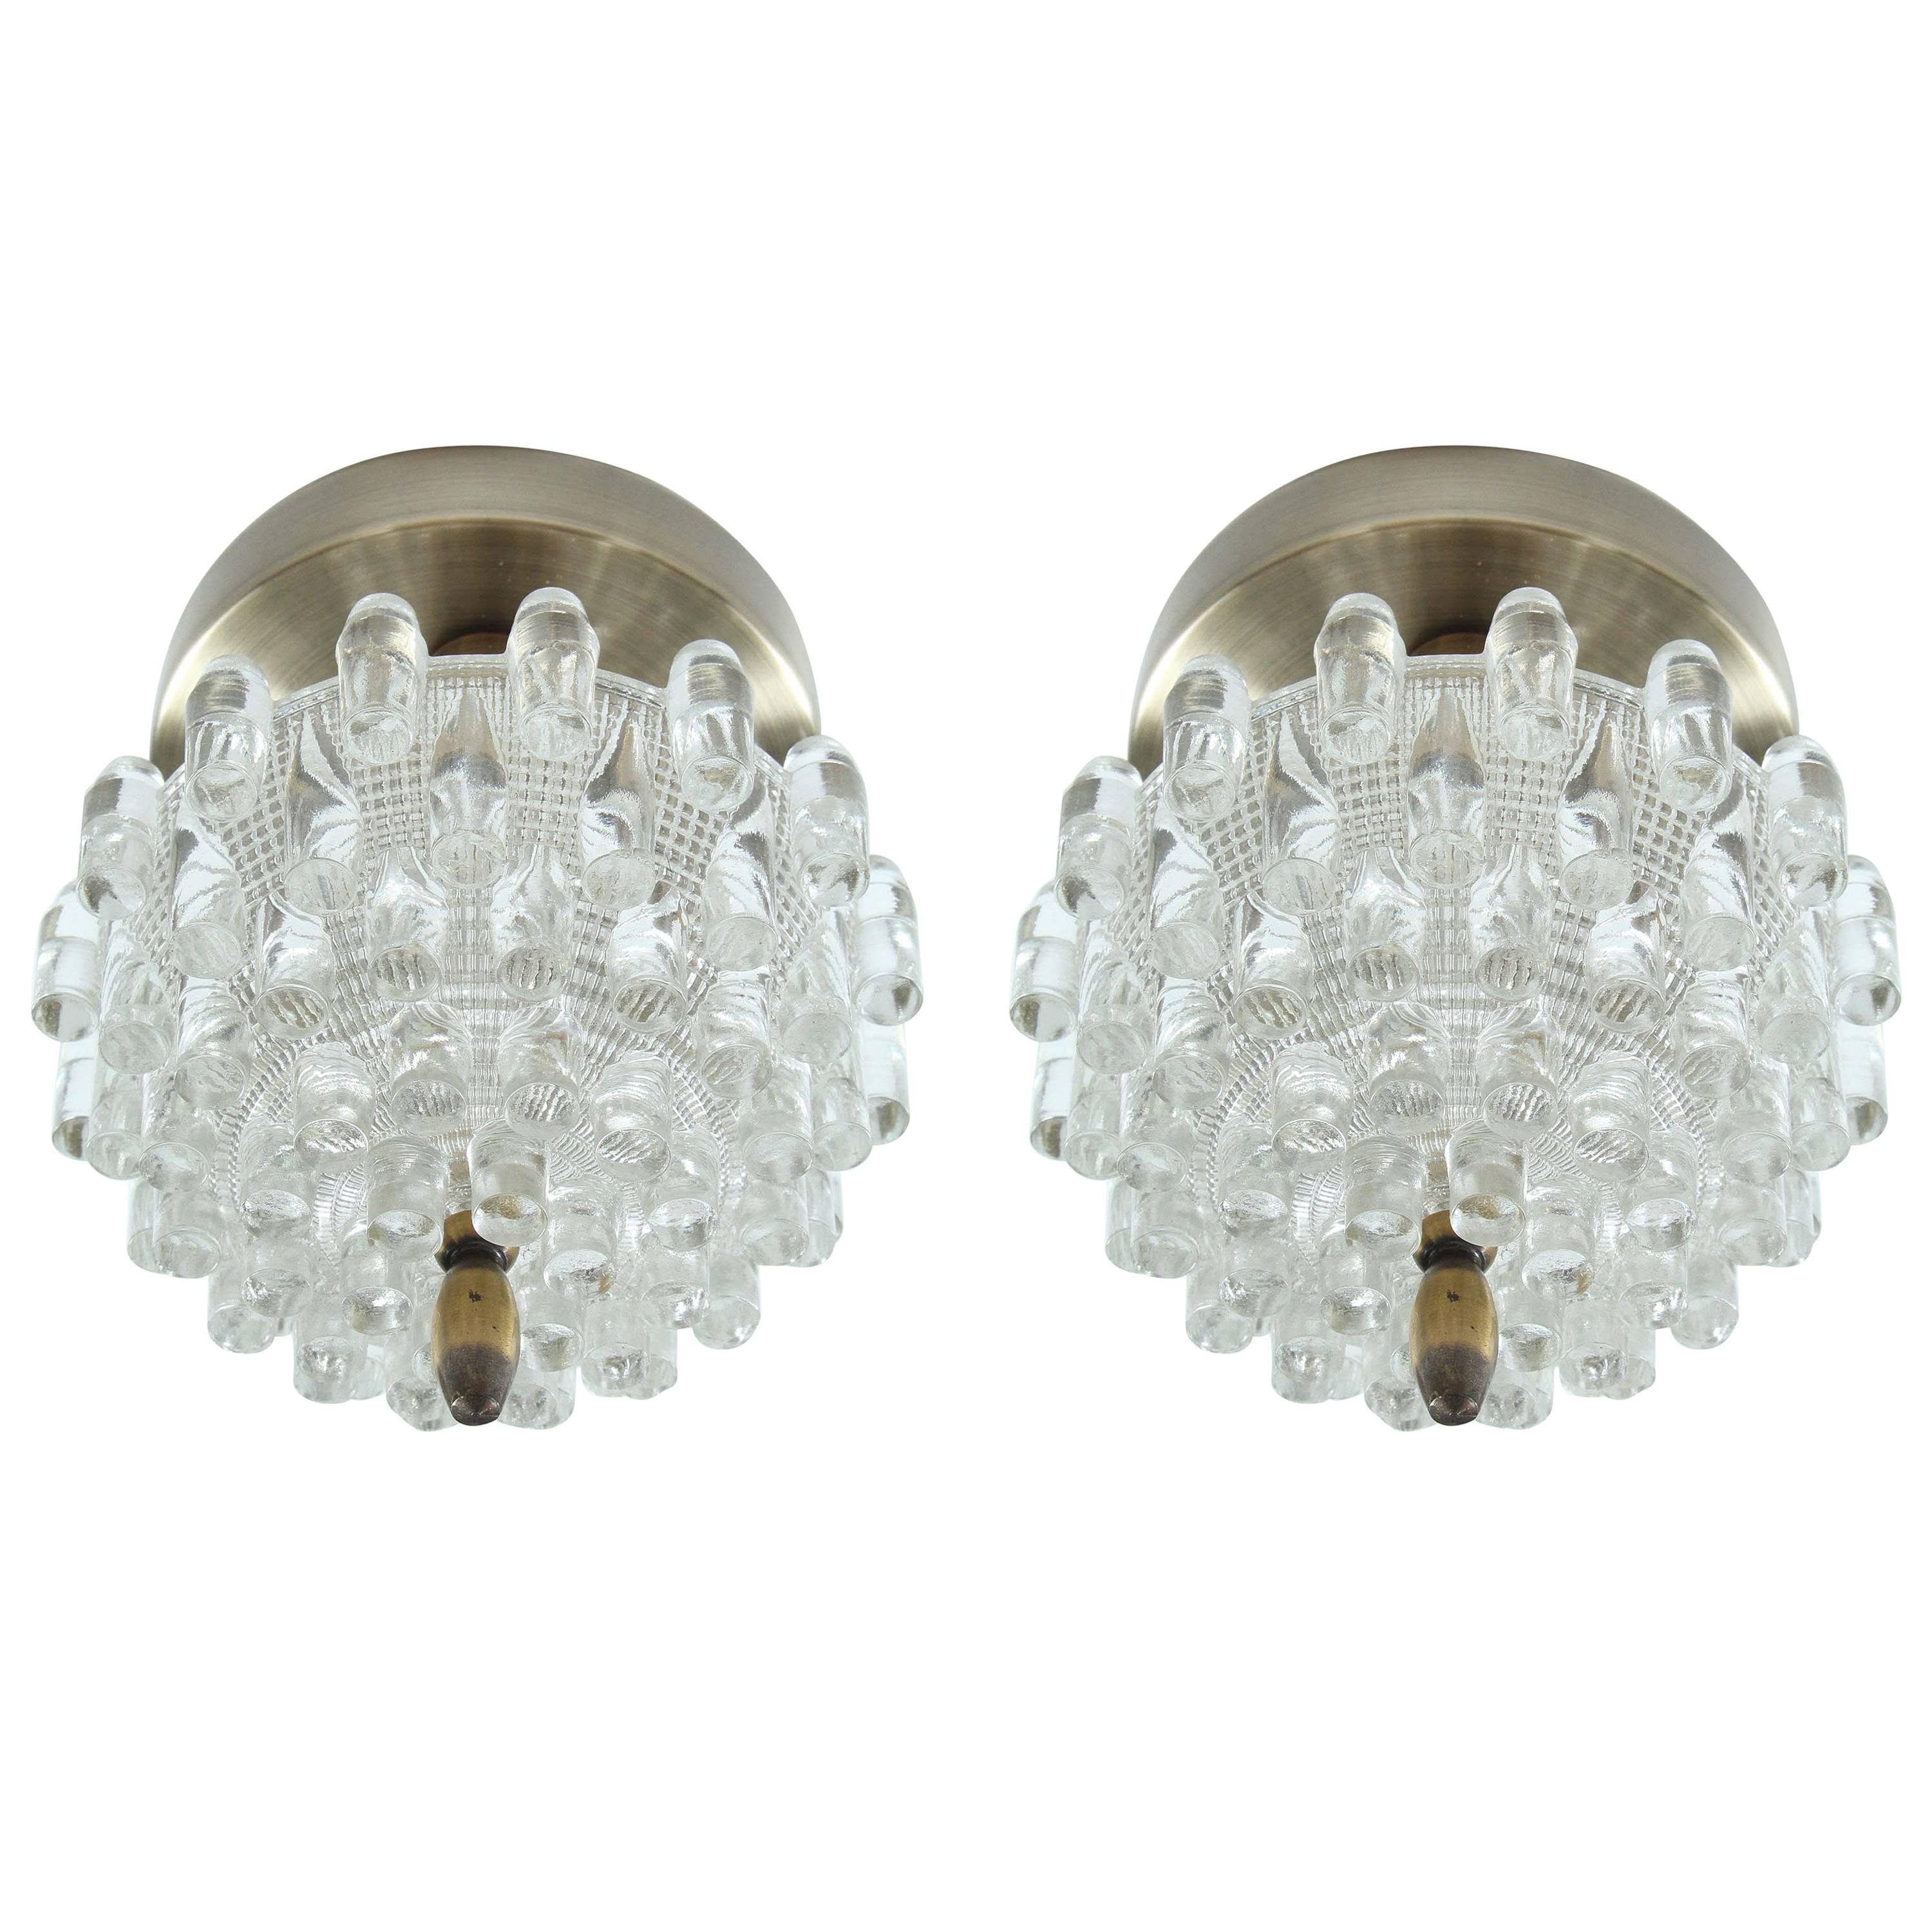 Pair of Unusual Moulded Glass Sconces